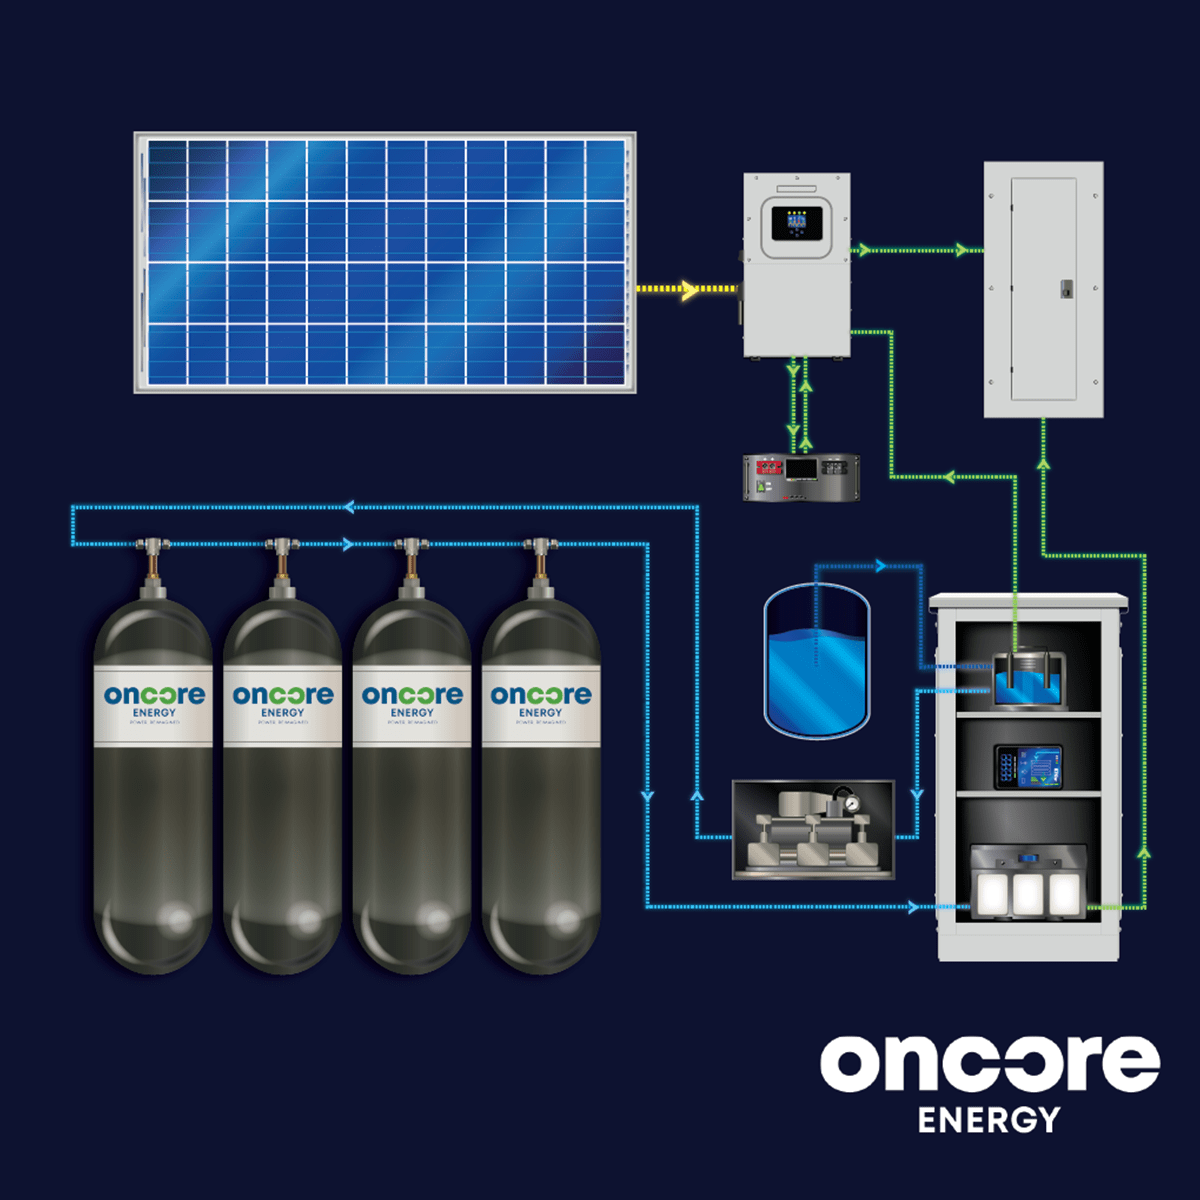 Oncore Energy hydrogen fuel cell generator is the third leg of microgrid system